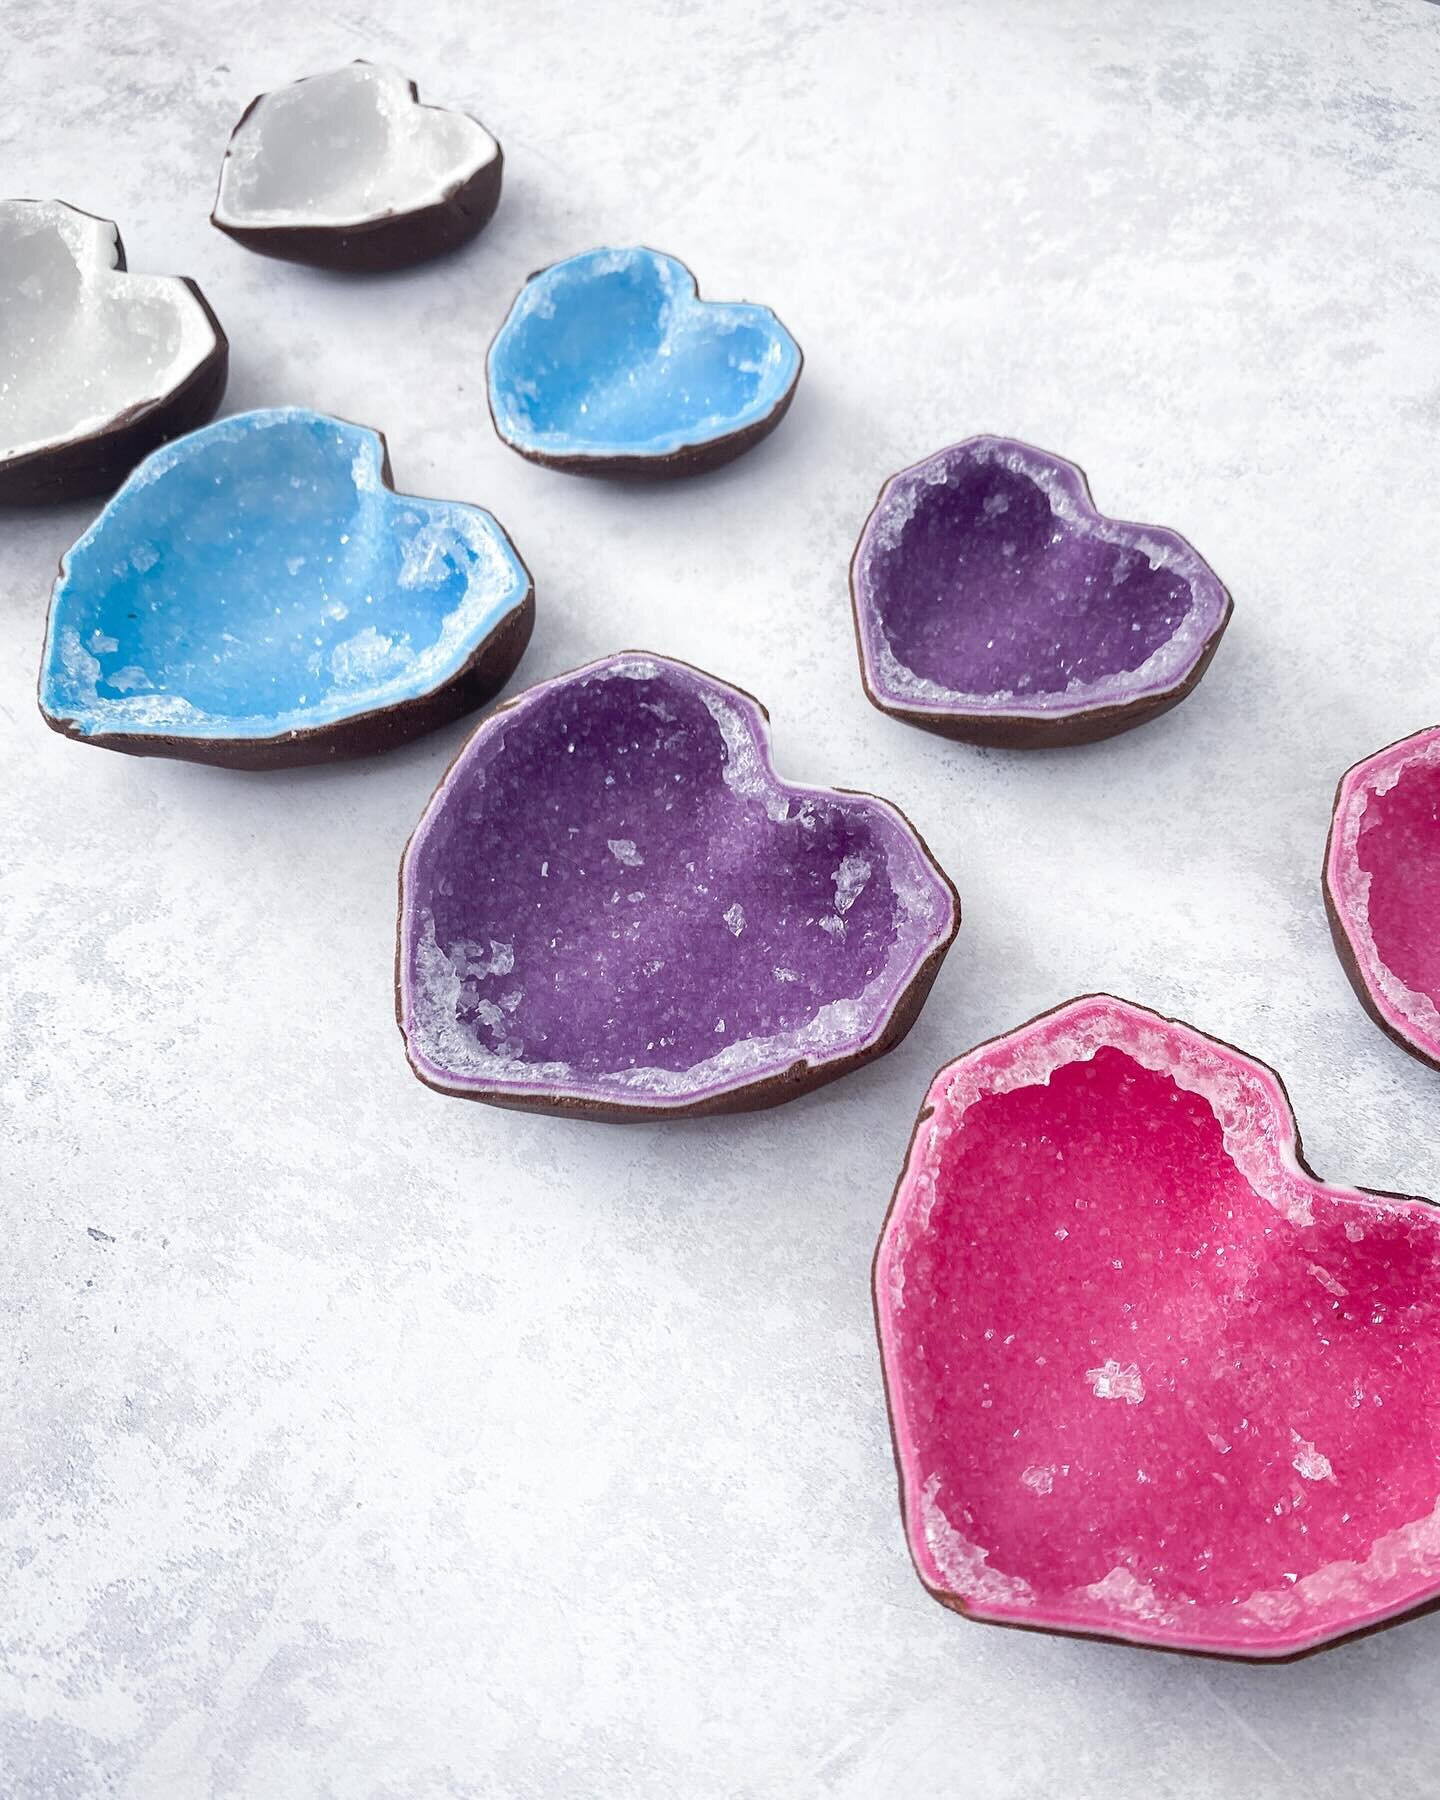 We introduced our large range of candy hearts late last year and so far they have received a great deal of love! Which colour is your favourite? 

#crystals #crystallove #crystalmagic #candyrocks #crystalcandy #sugarcrystals #sugarart #edibleart #all